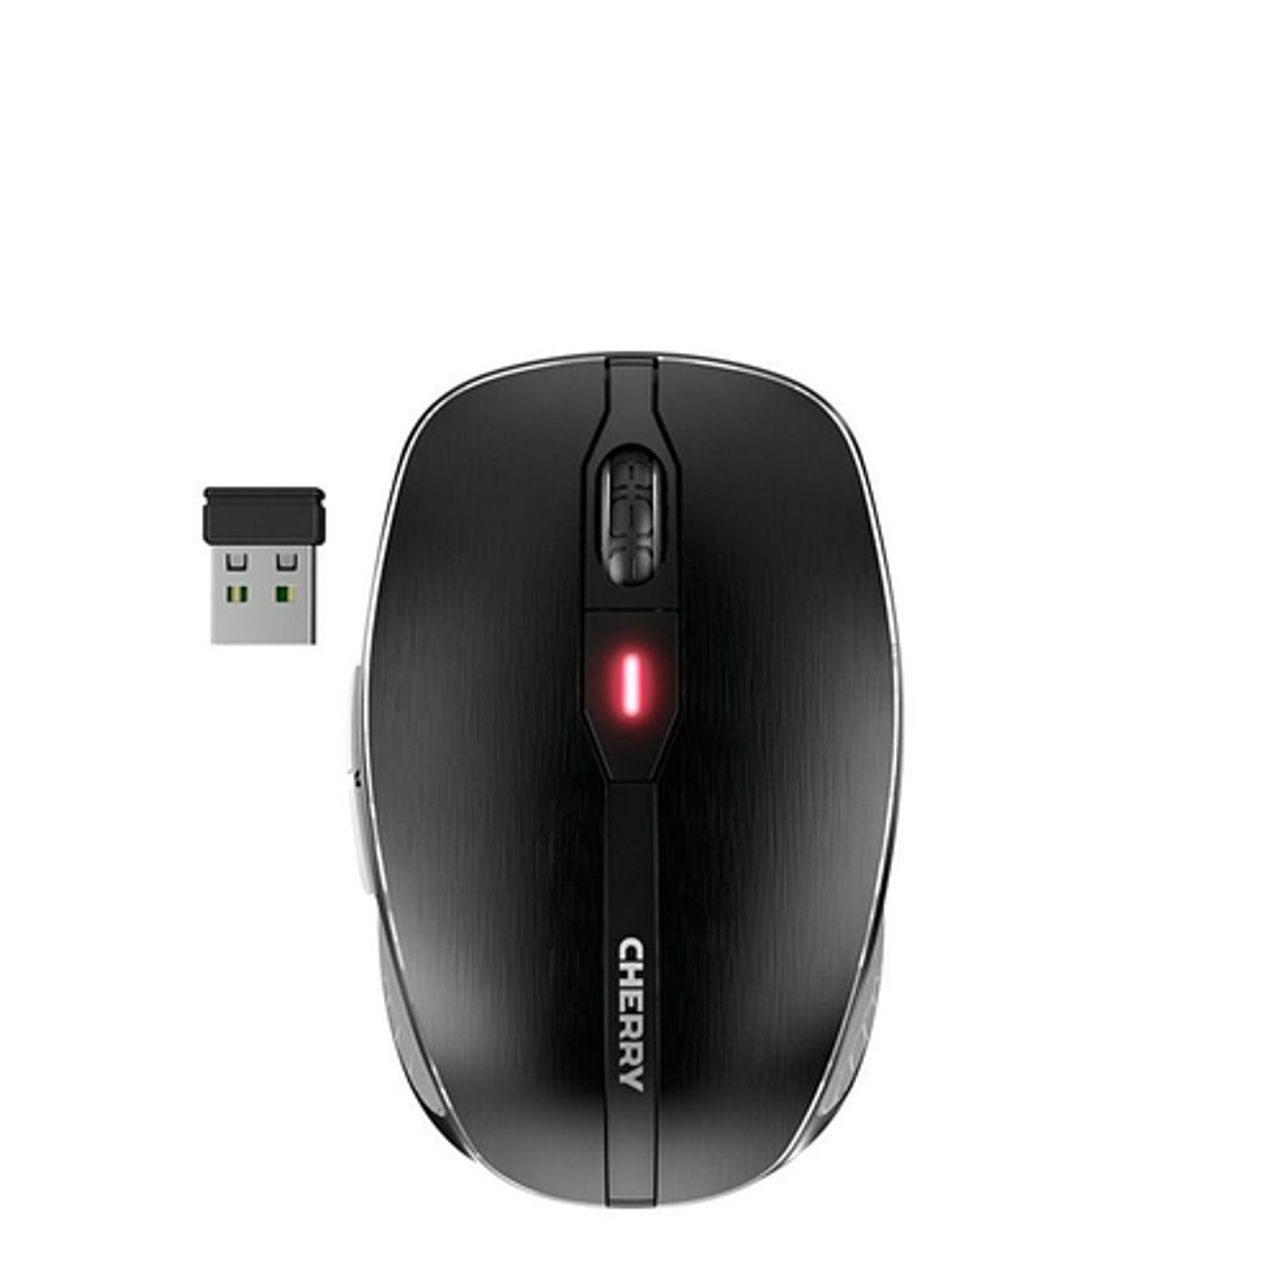 CHERRY - MW 8C Advanced Rechargeable Wireless Mouse - Black